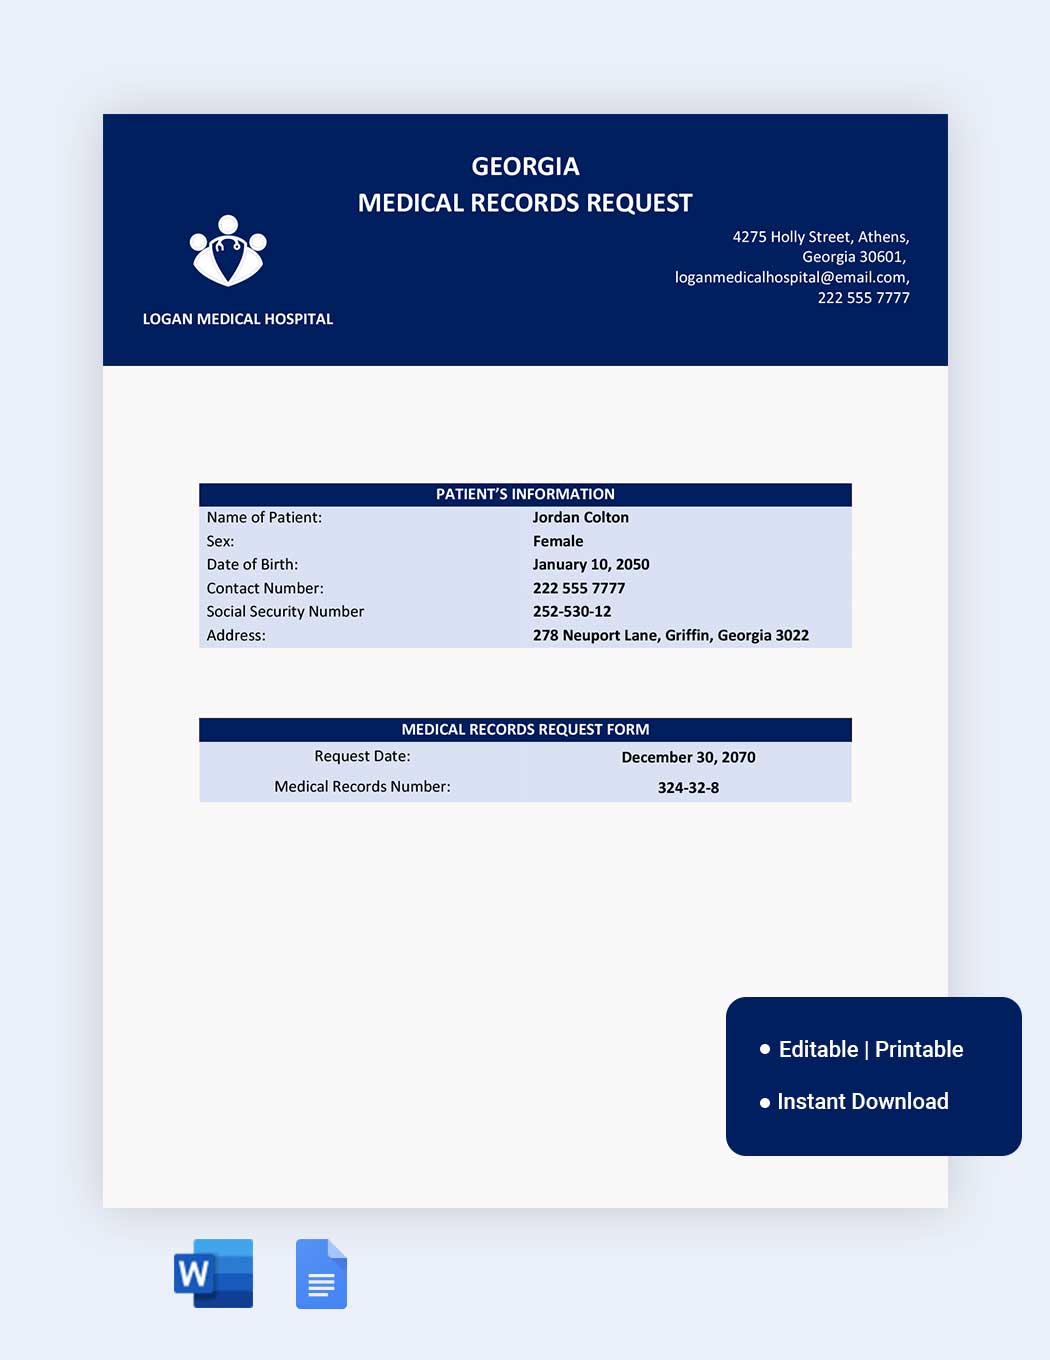 Georgia Medical Records Request Template in Word, Google Docs